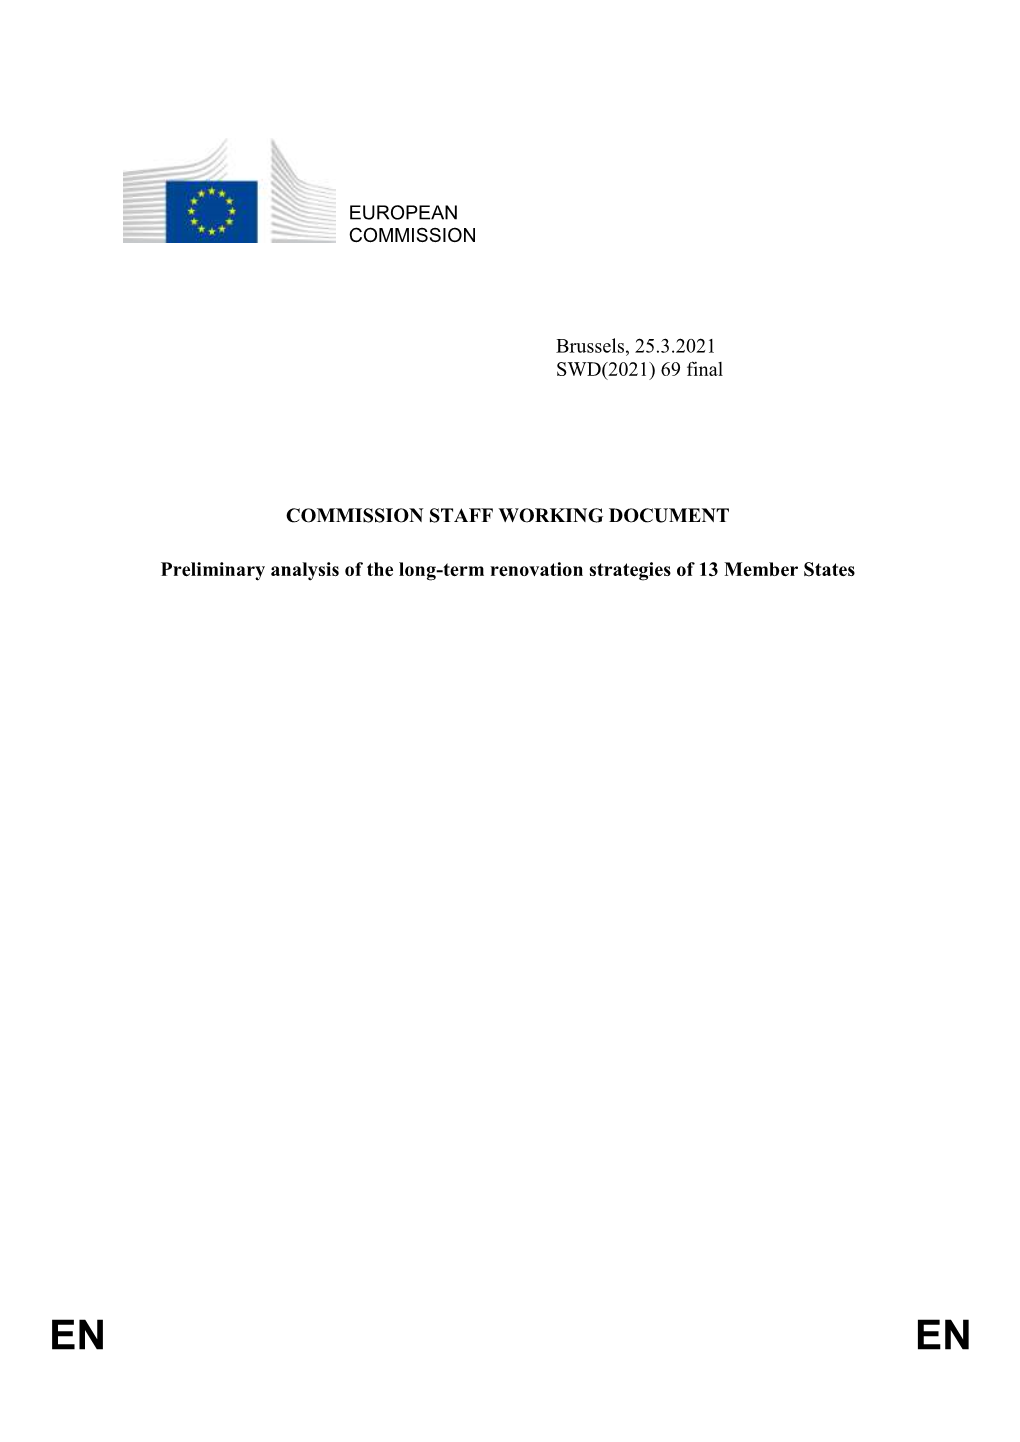 Analysis of the Long-Term Renovation Strategies of 13 Member States